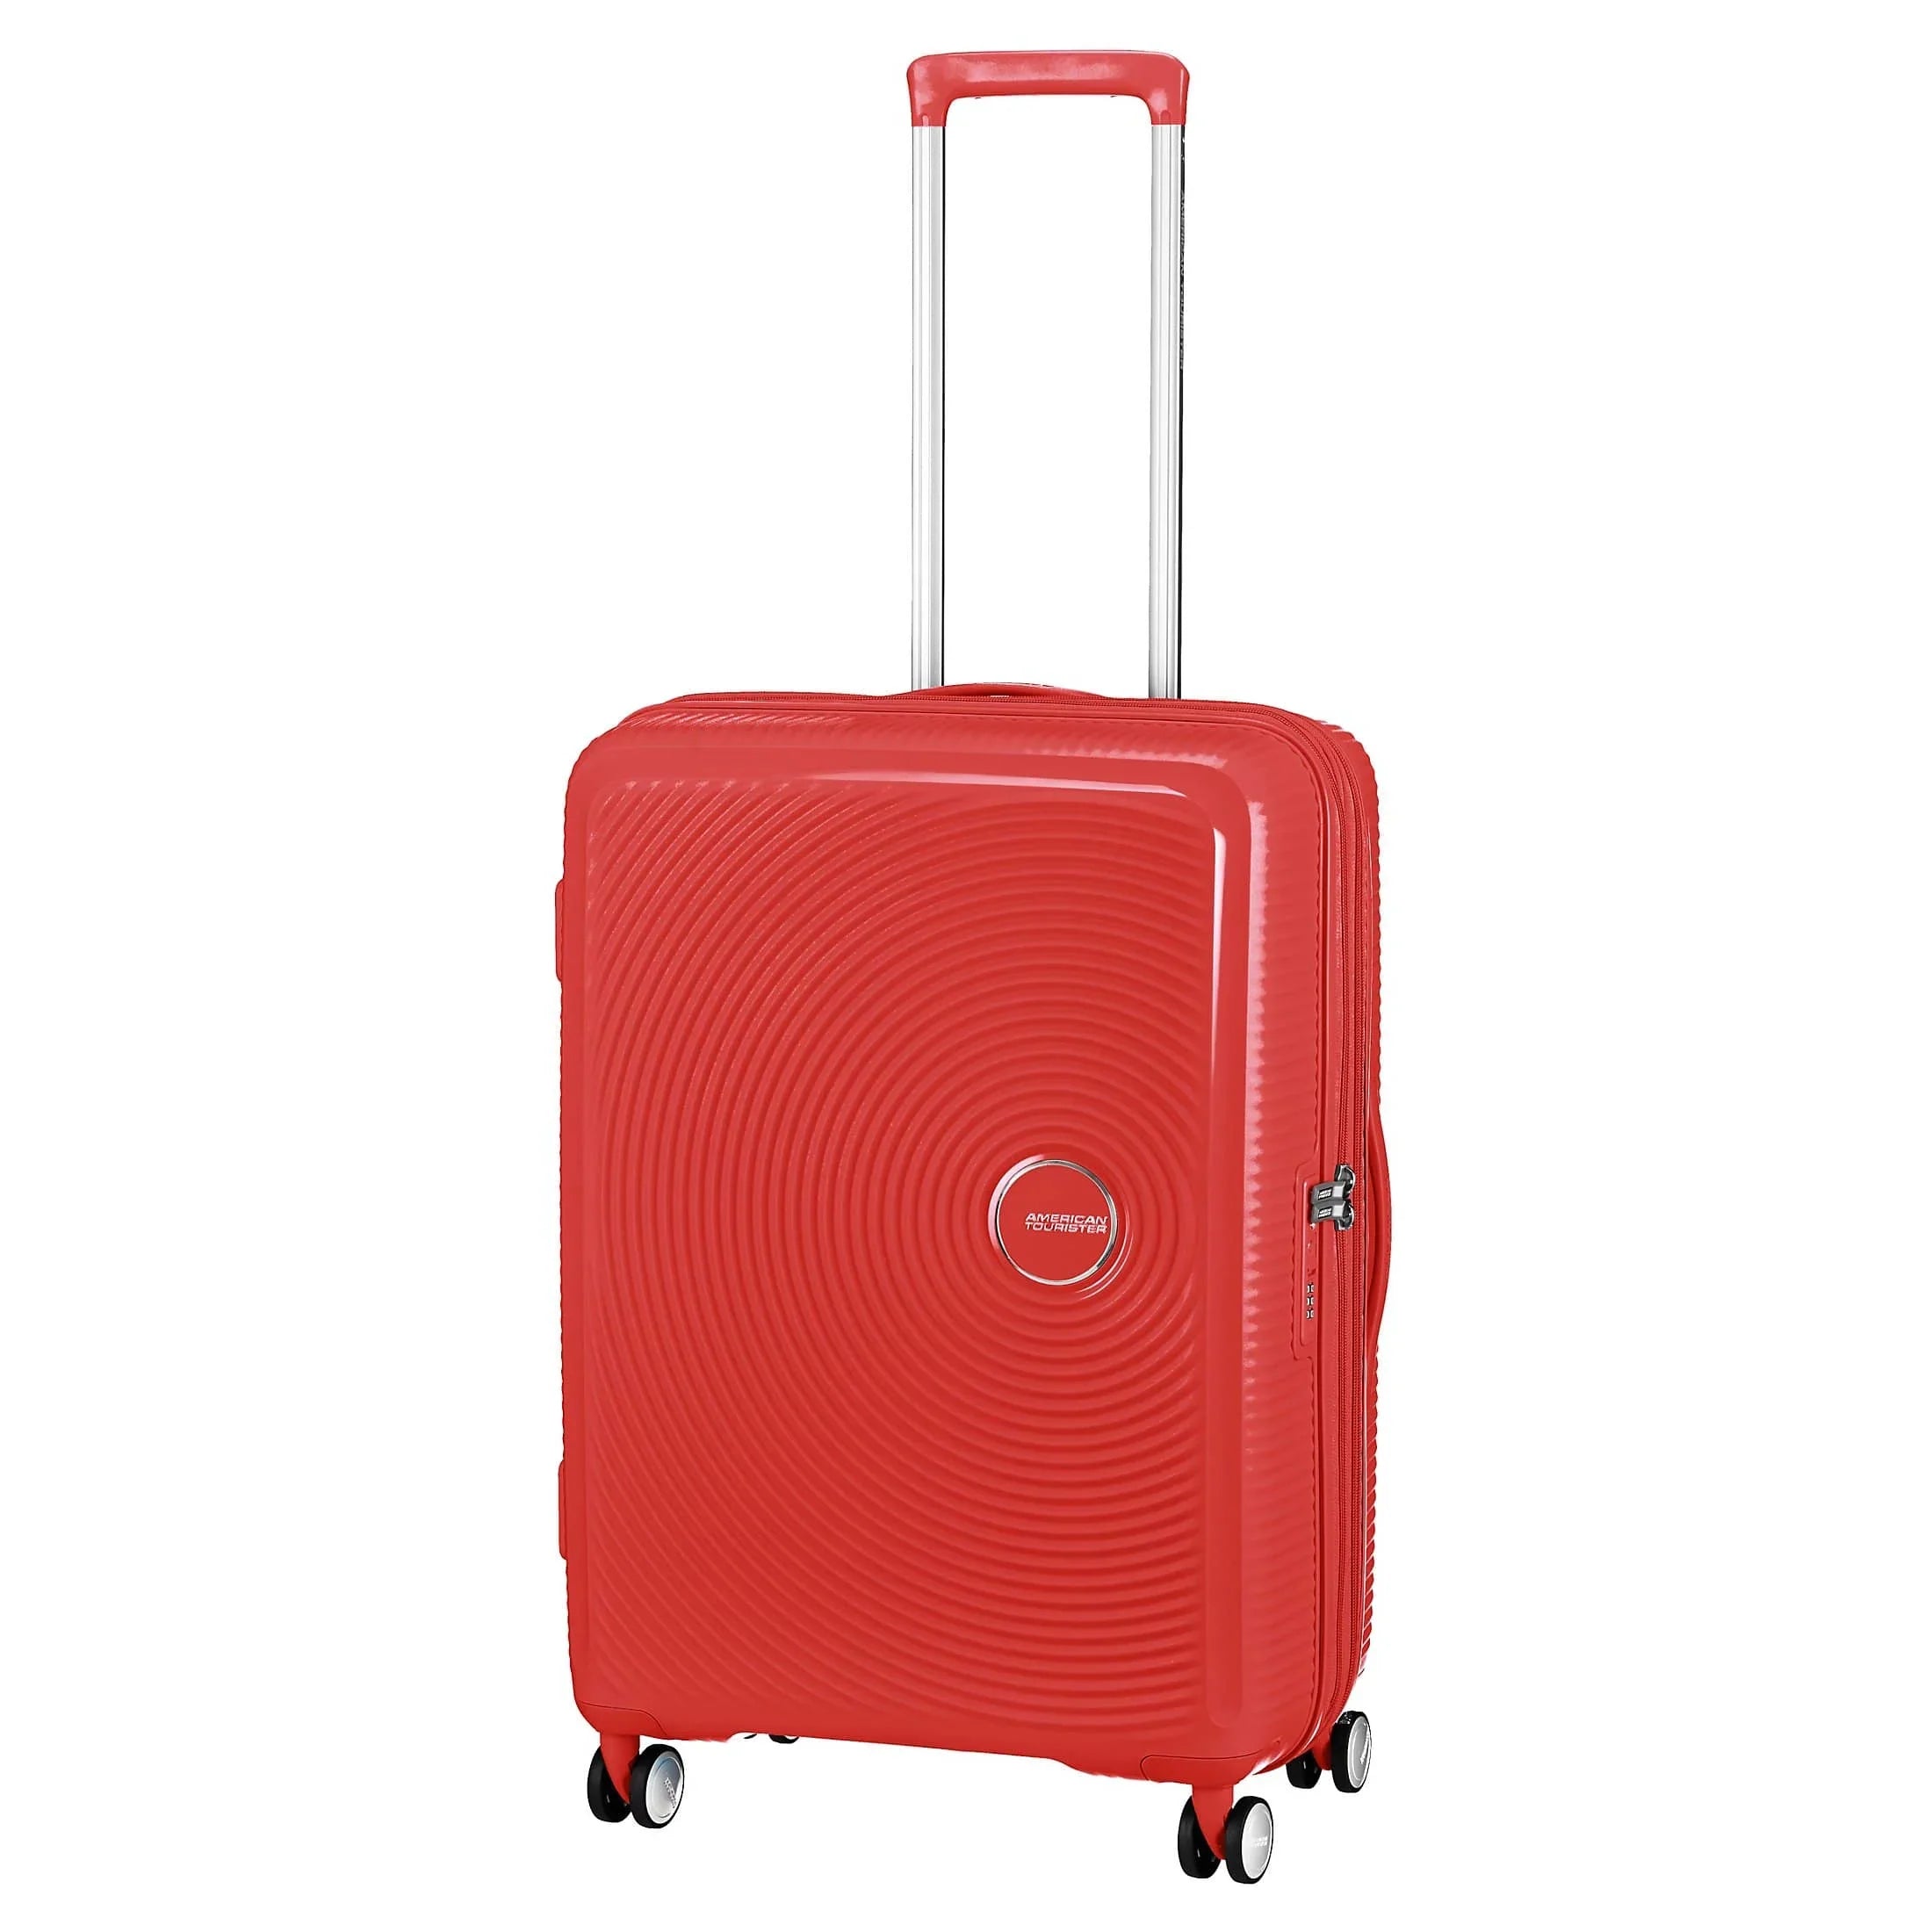 American Tourister Soundbox trolley 4 roues 67 cm - rouge corail